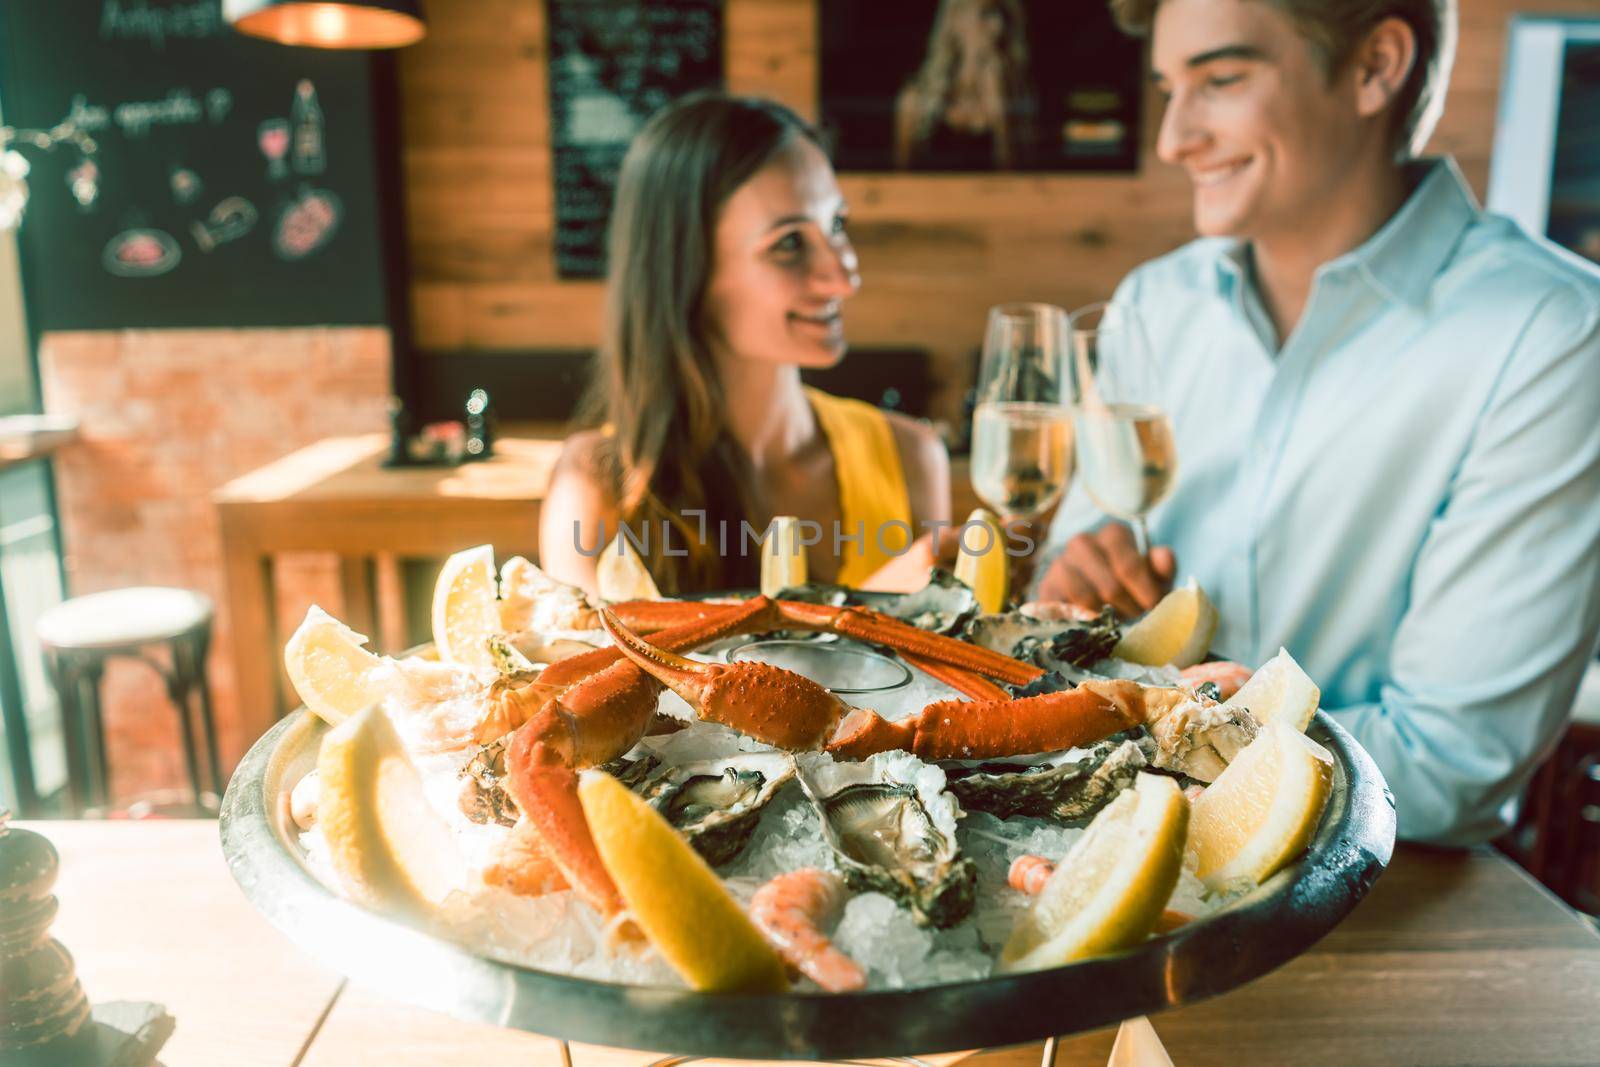 Close-up of fresh oysters and crabs served on ice with slices of lemon at the table of a romantic young couple eating at restaurant